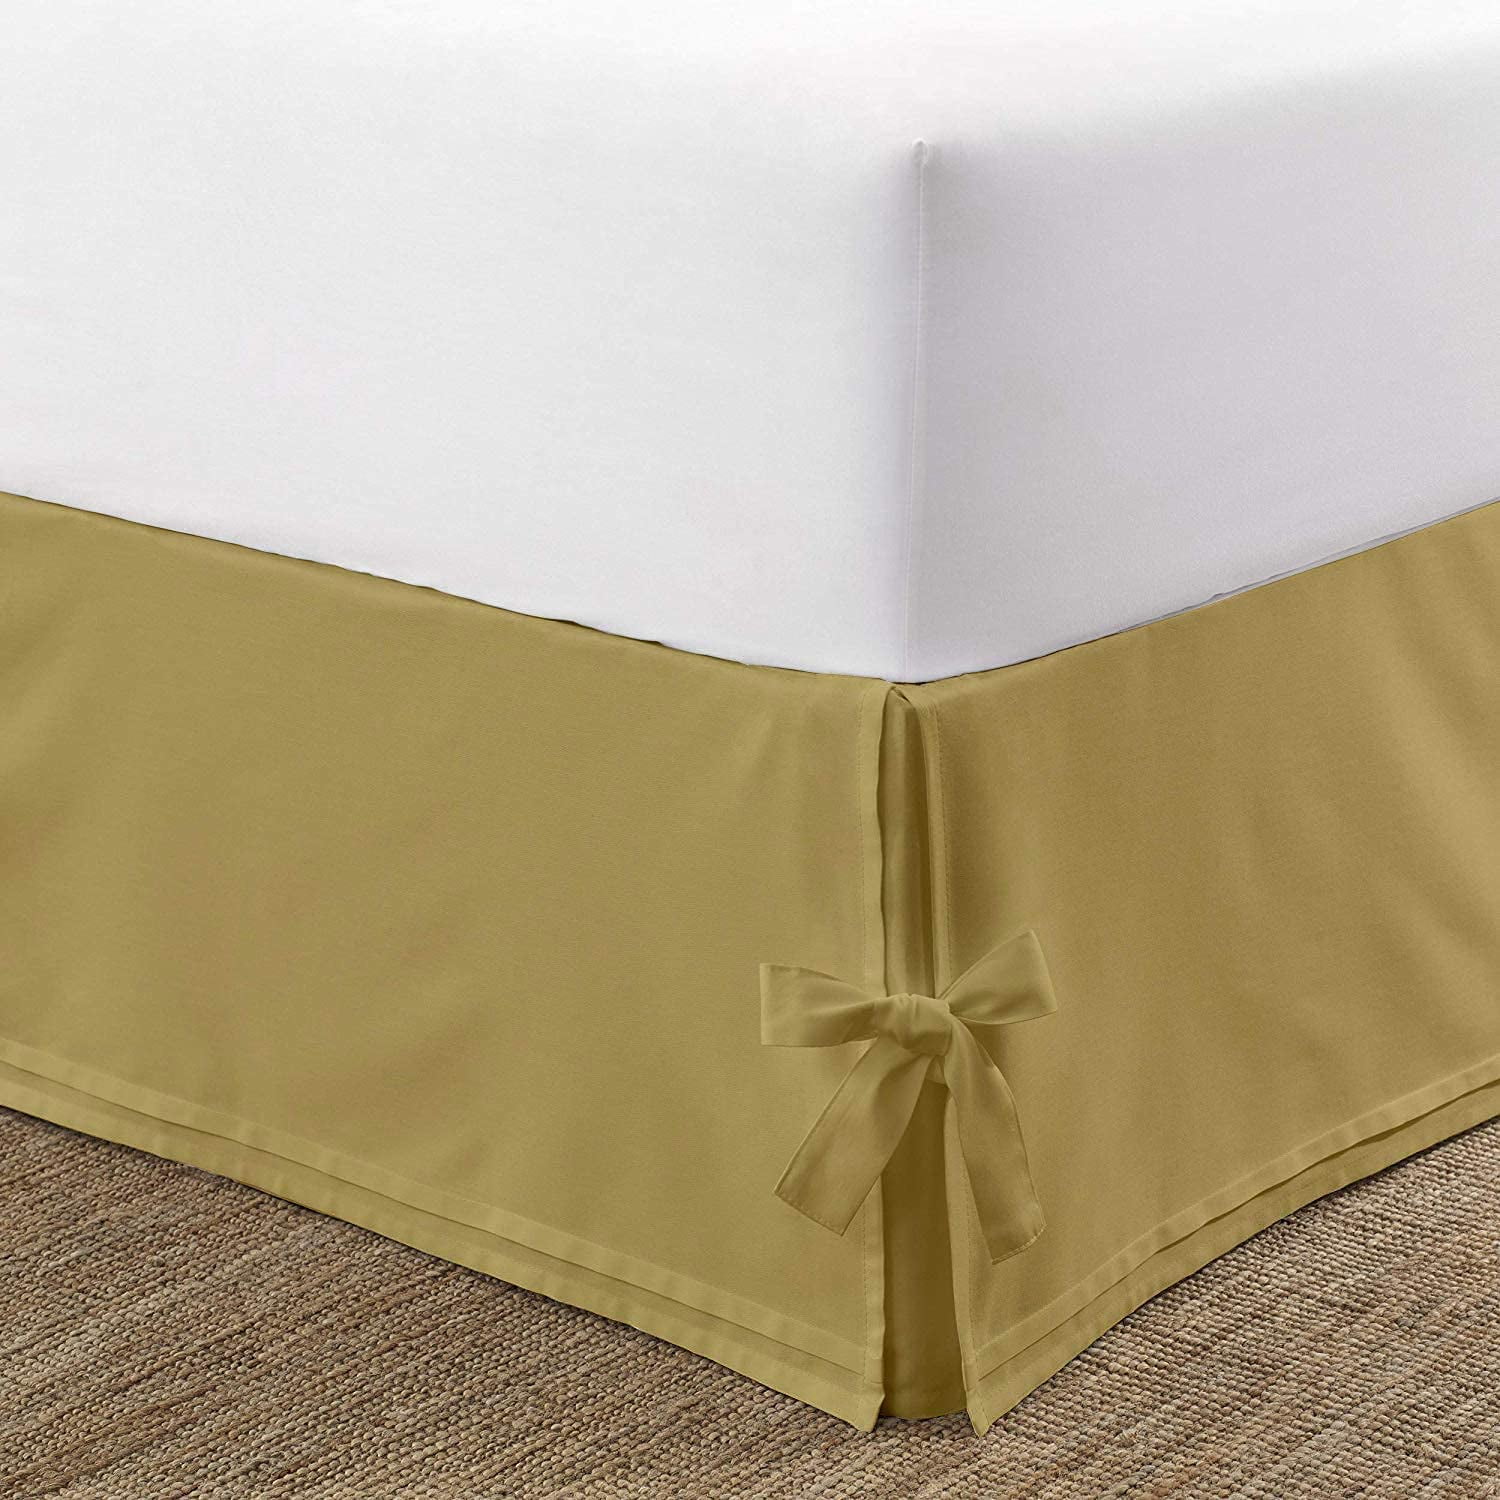 Luxurious Comfort Beddings 800TC Bedskirt 18 Drop length 100% Egyptian Cotton California King Size Ivory Solid